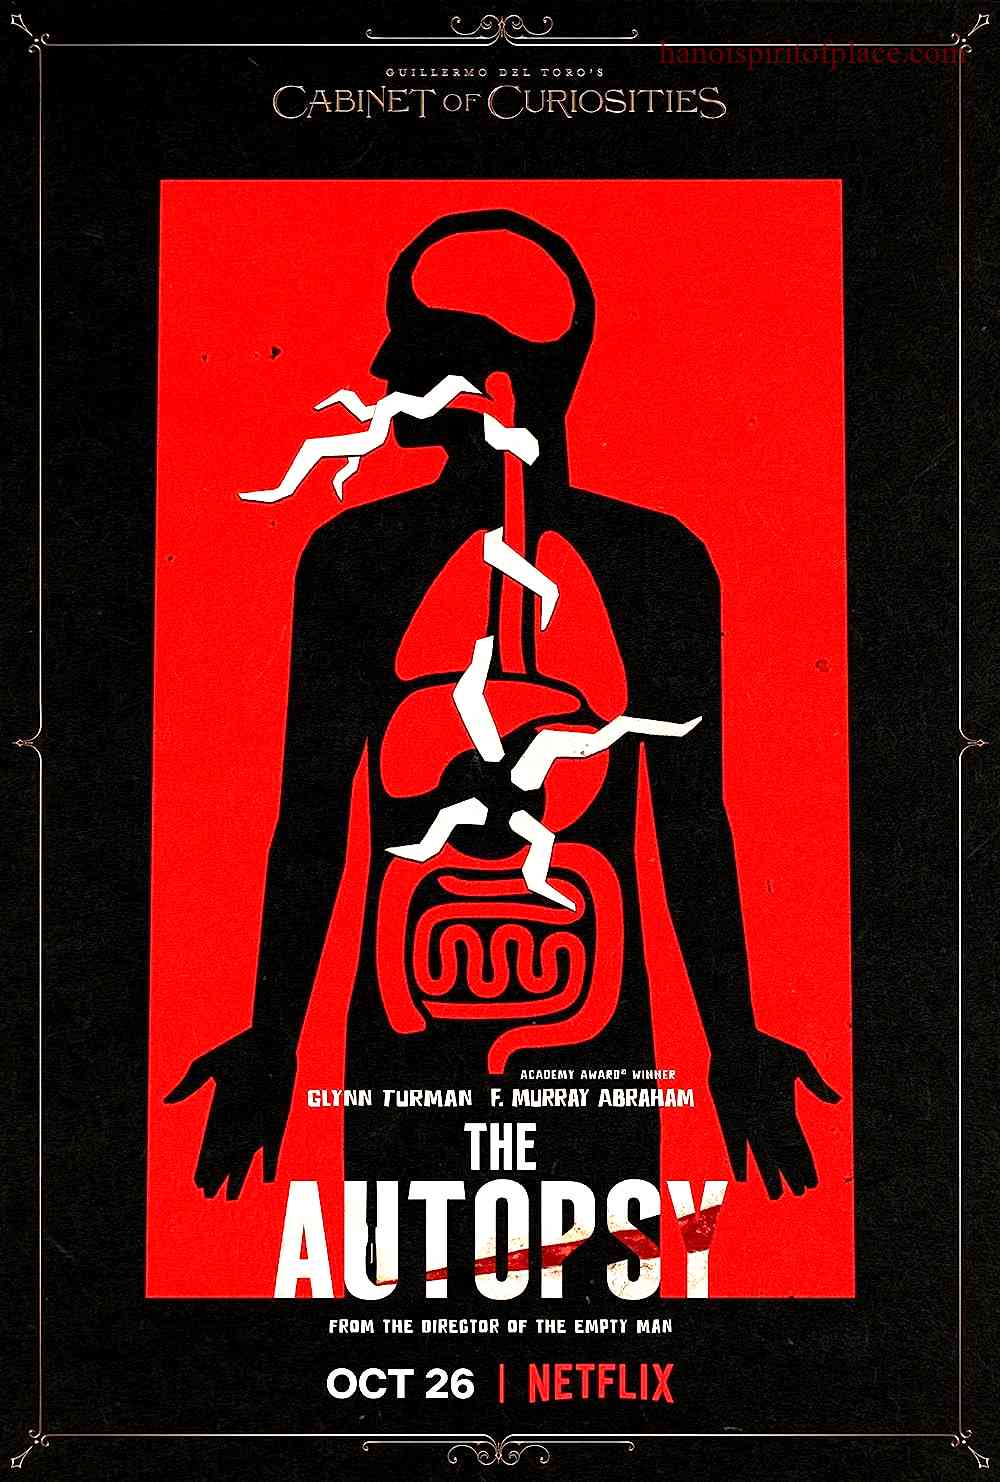 Unraveling the History and Significance of the Autopsy